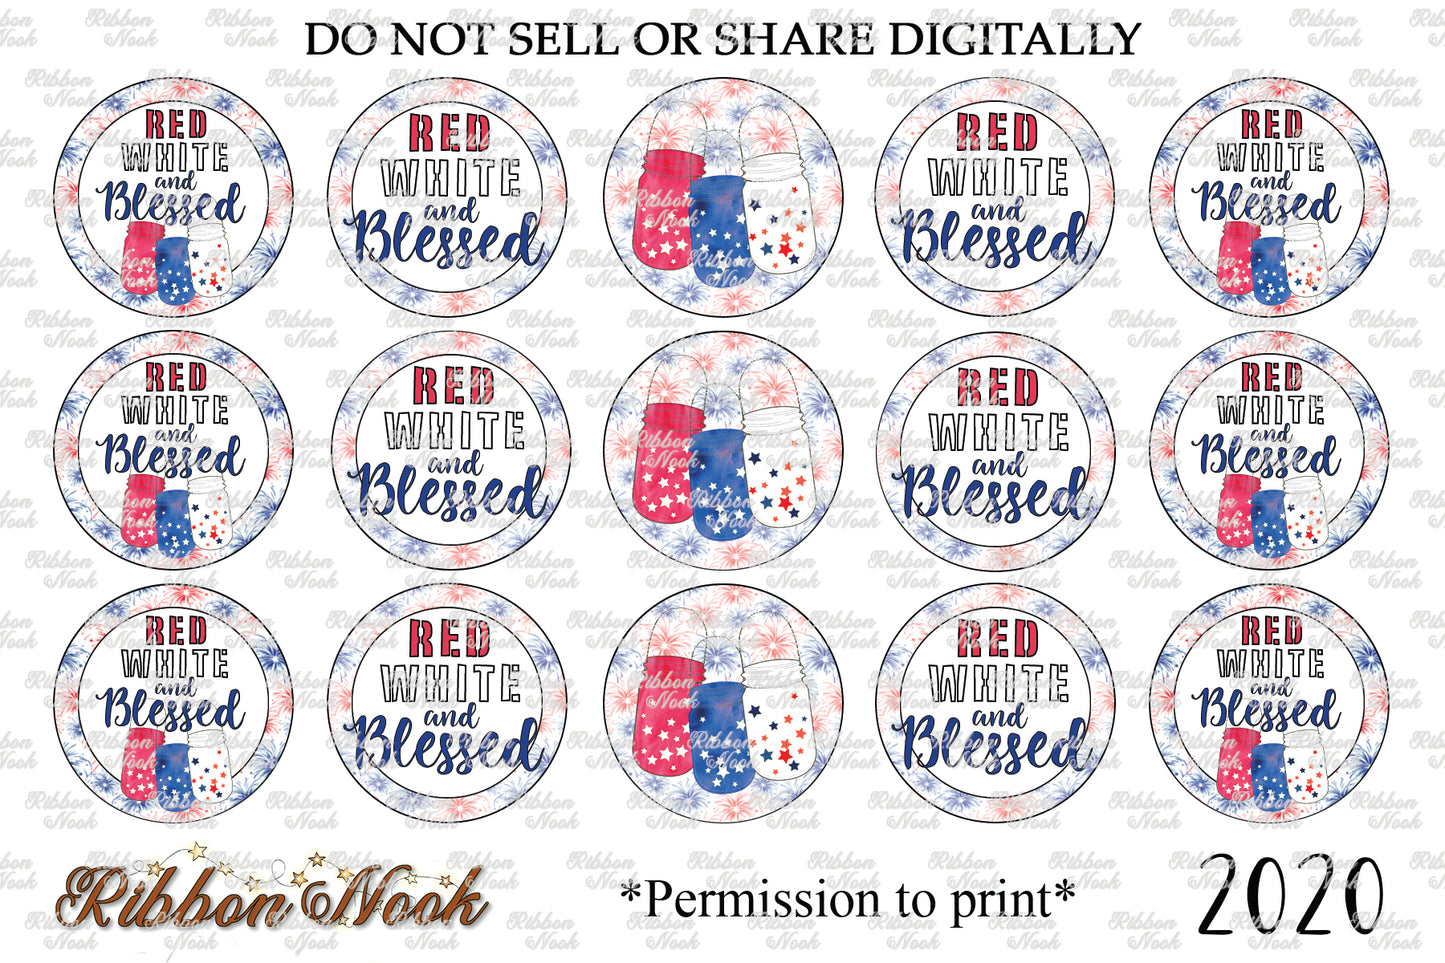 Red, White and Blessed Bottle Cap Images